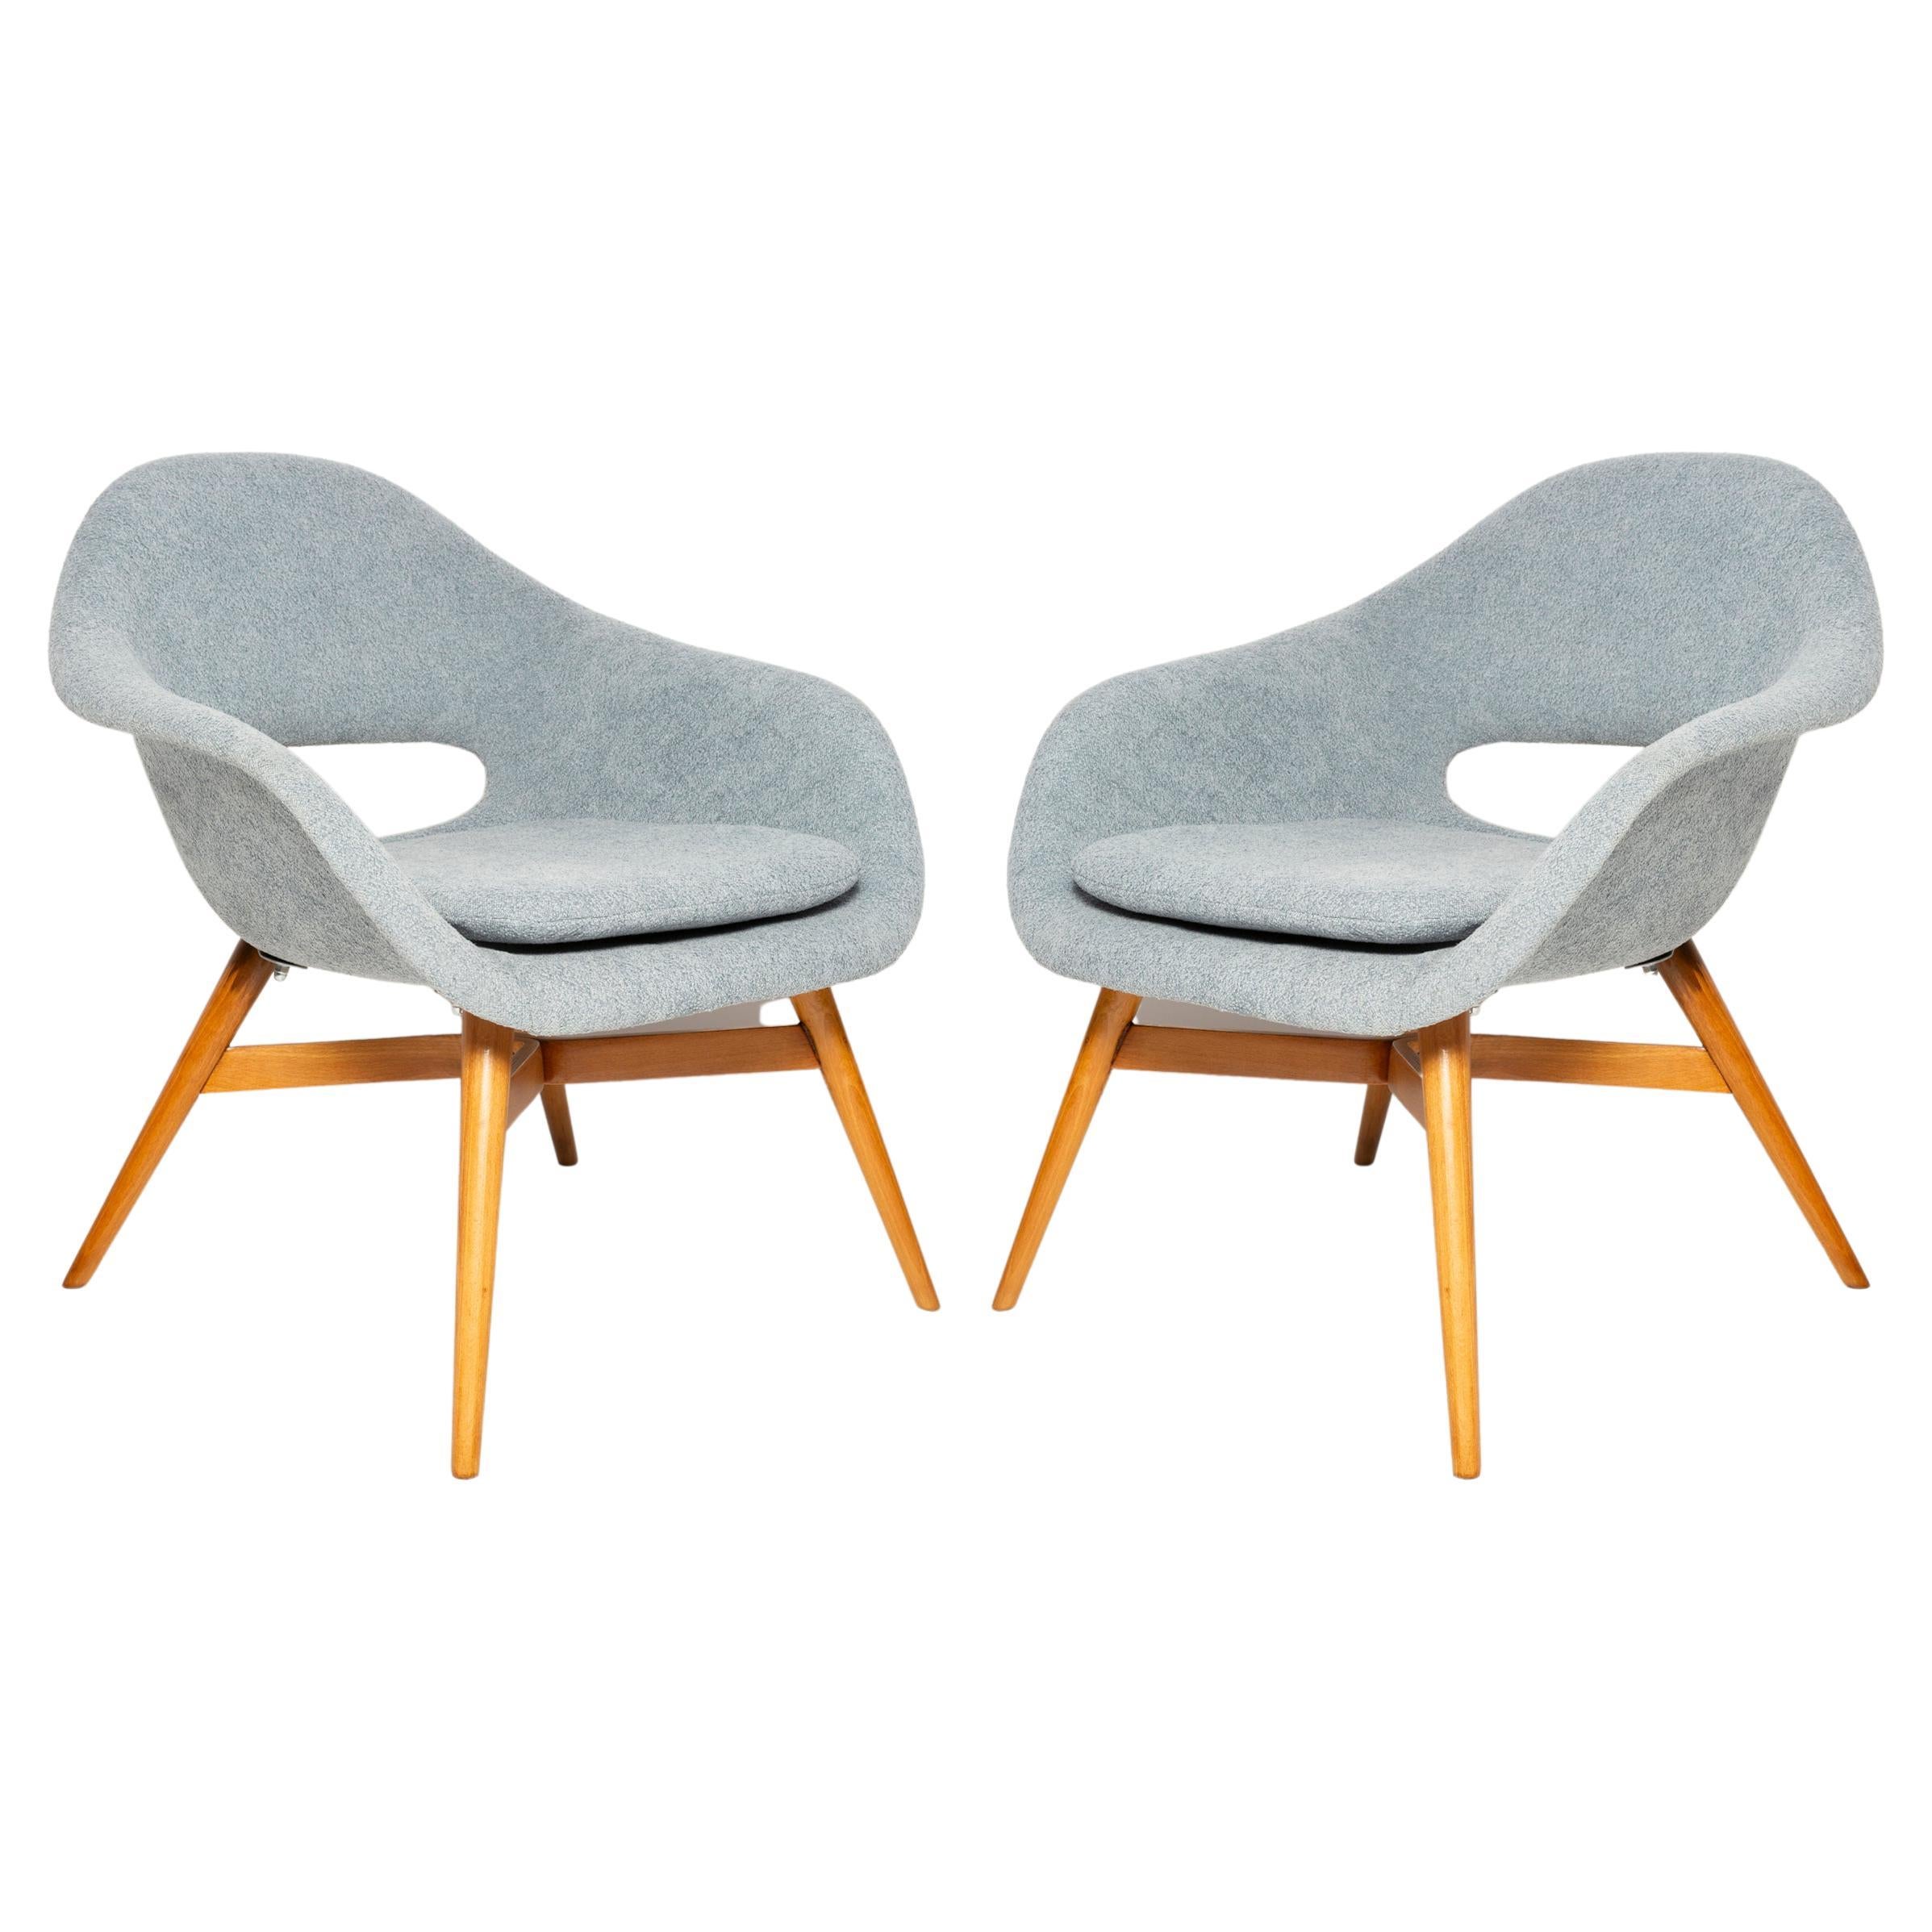 Set of Two Mid-Century Light Blue Shell Chairs, by Navratil, Czechoslovakia 1960 For Sale